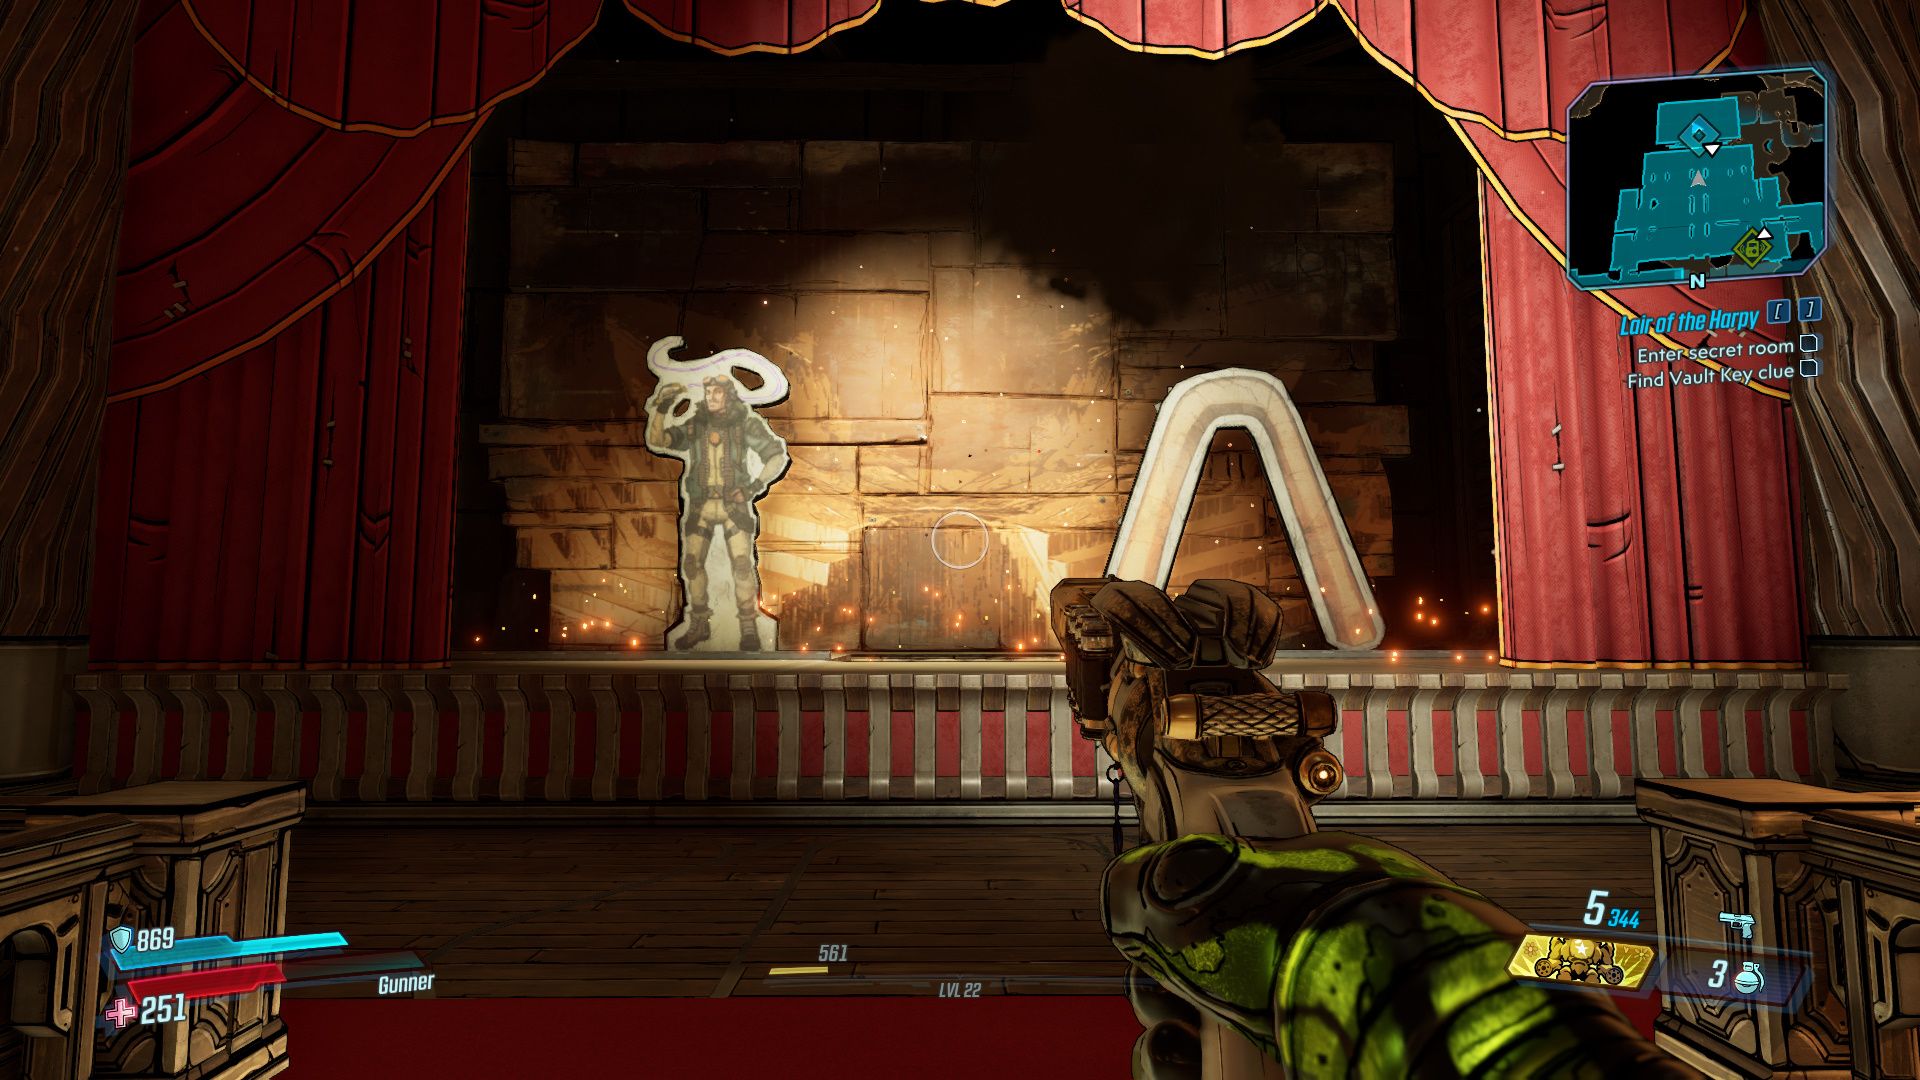 Rearranging the props in Borderlands 3